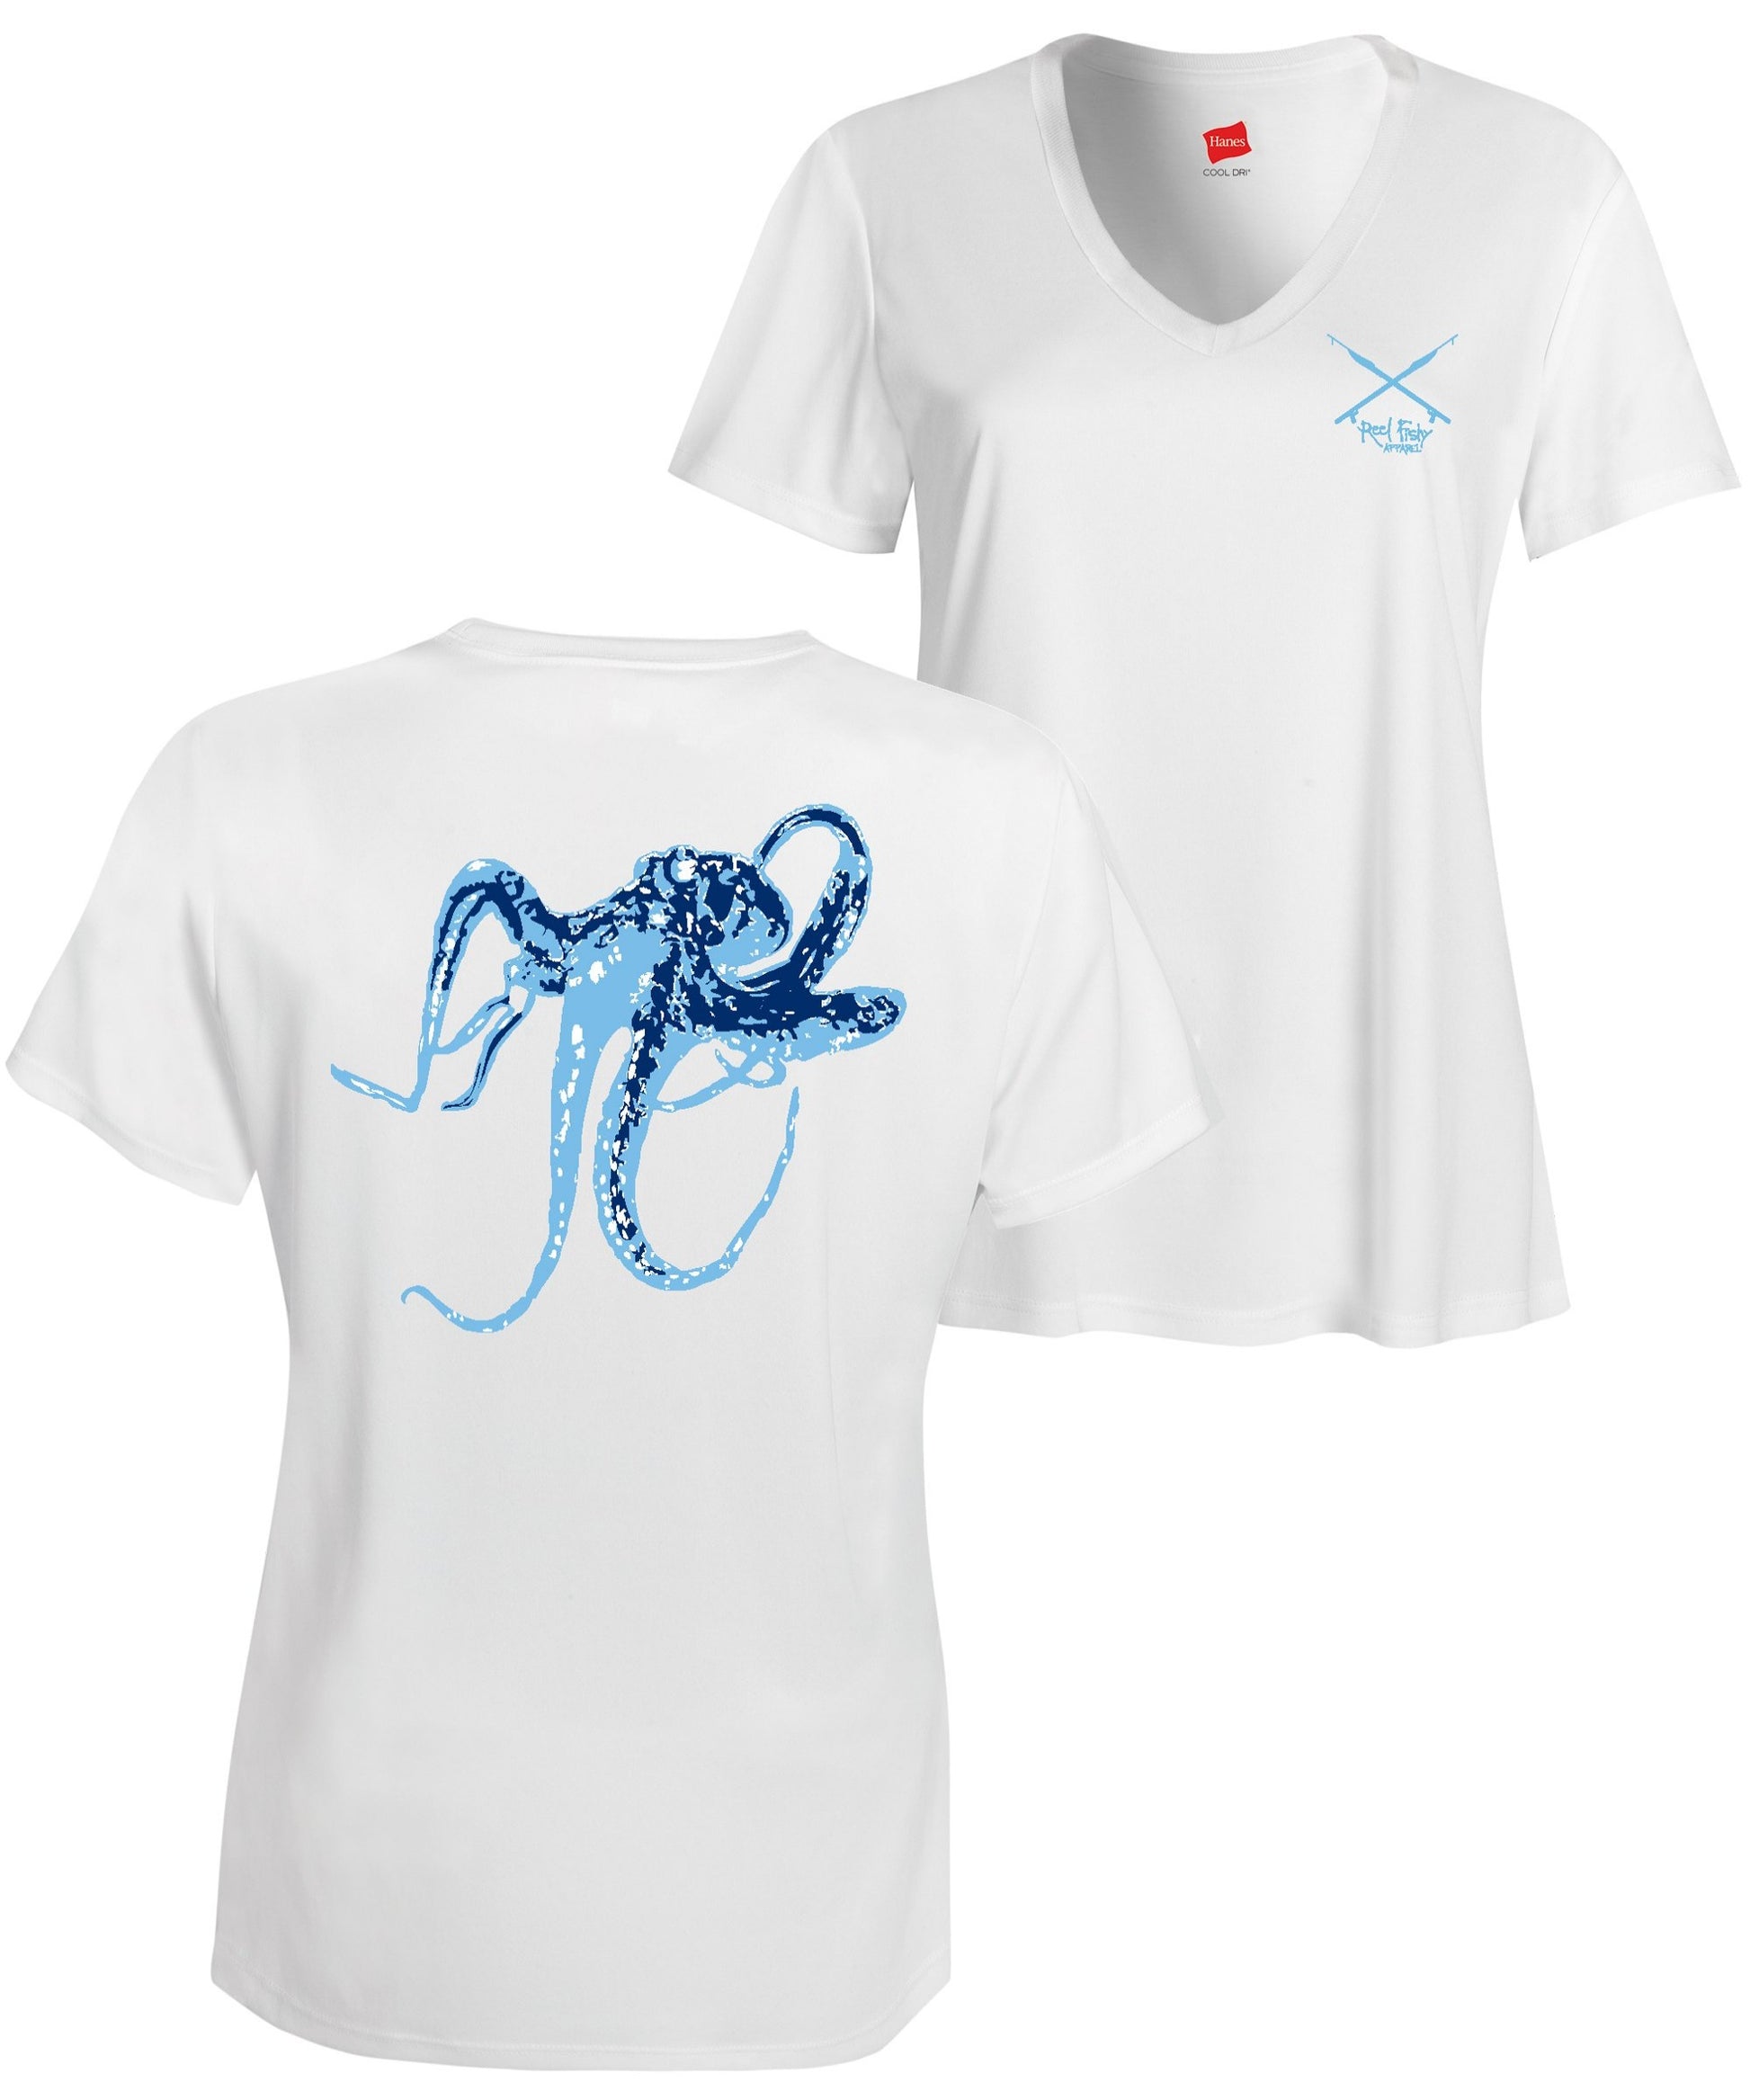 Women's Octopus Performance Dry-Fit Fishing 50+uv Sun Protection V-Neck Shirts - Reel Fishy Apparel XS / Ladies White V-Neck S/S